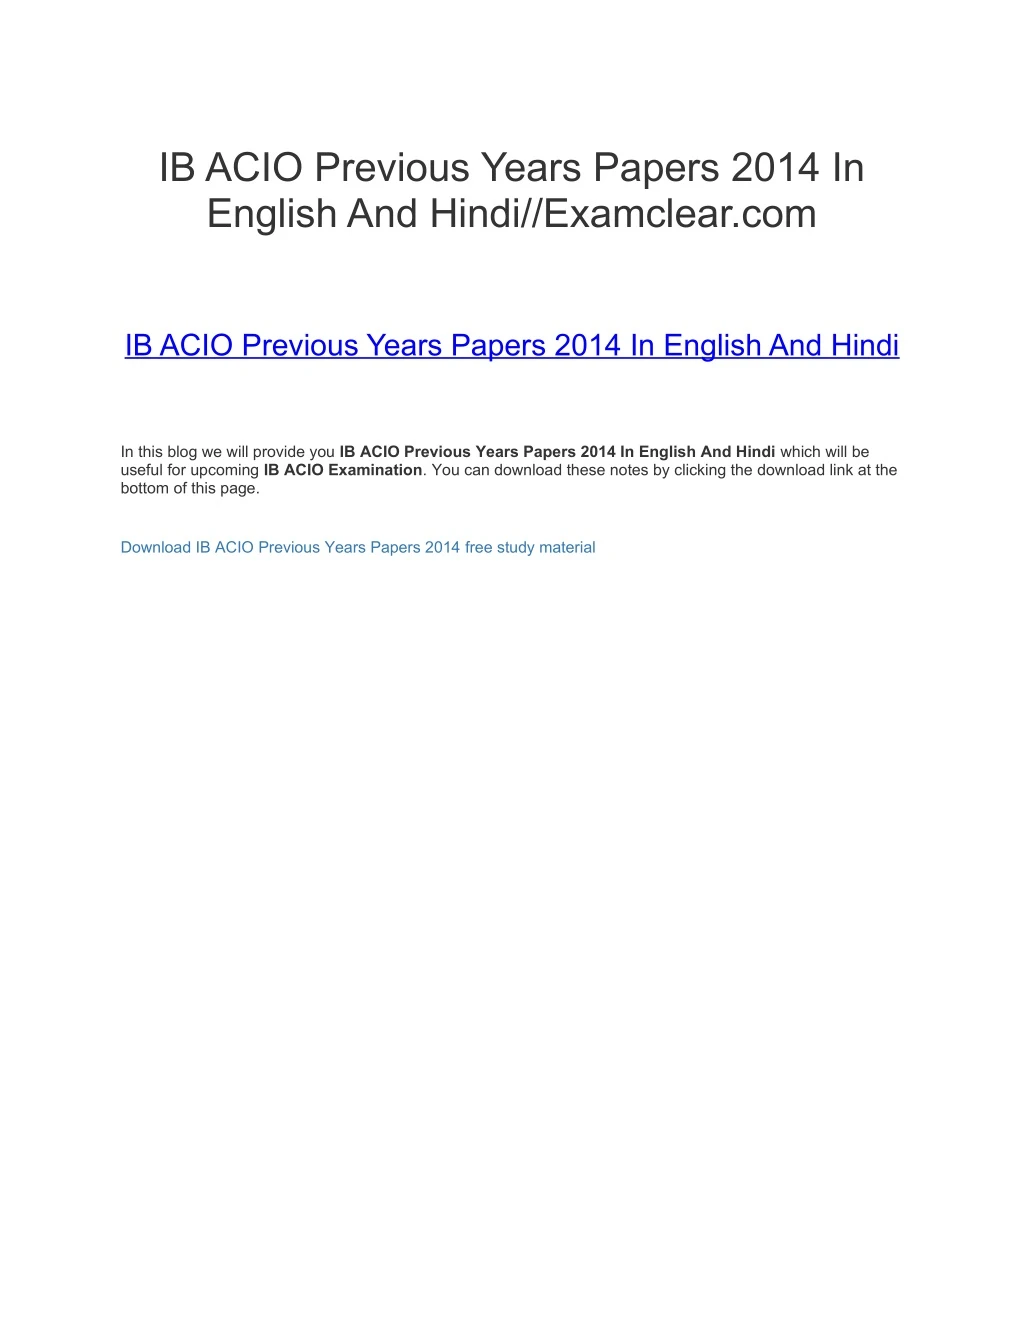 ib acio previous years papers 2014 in english